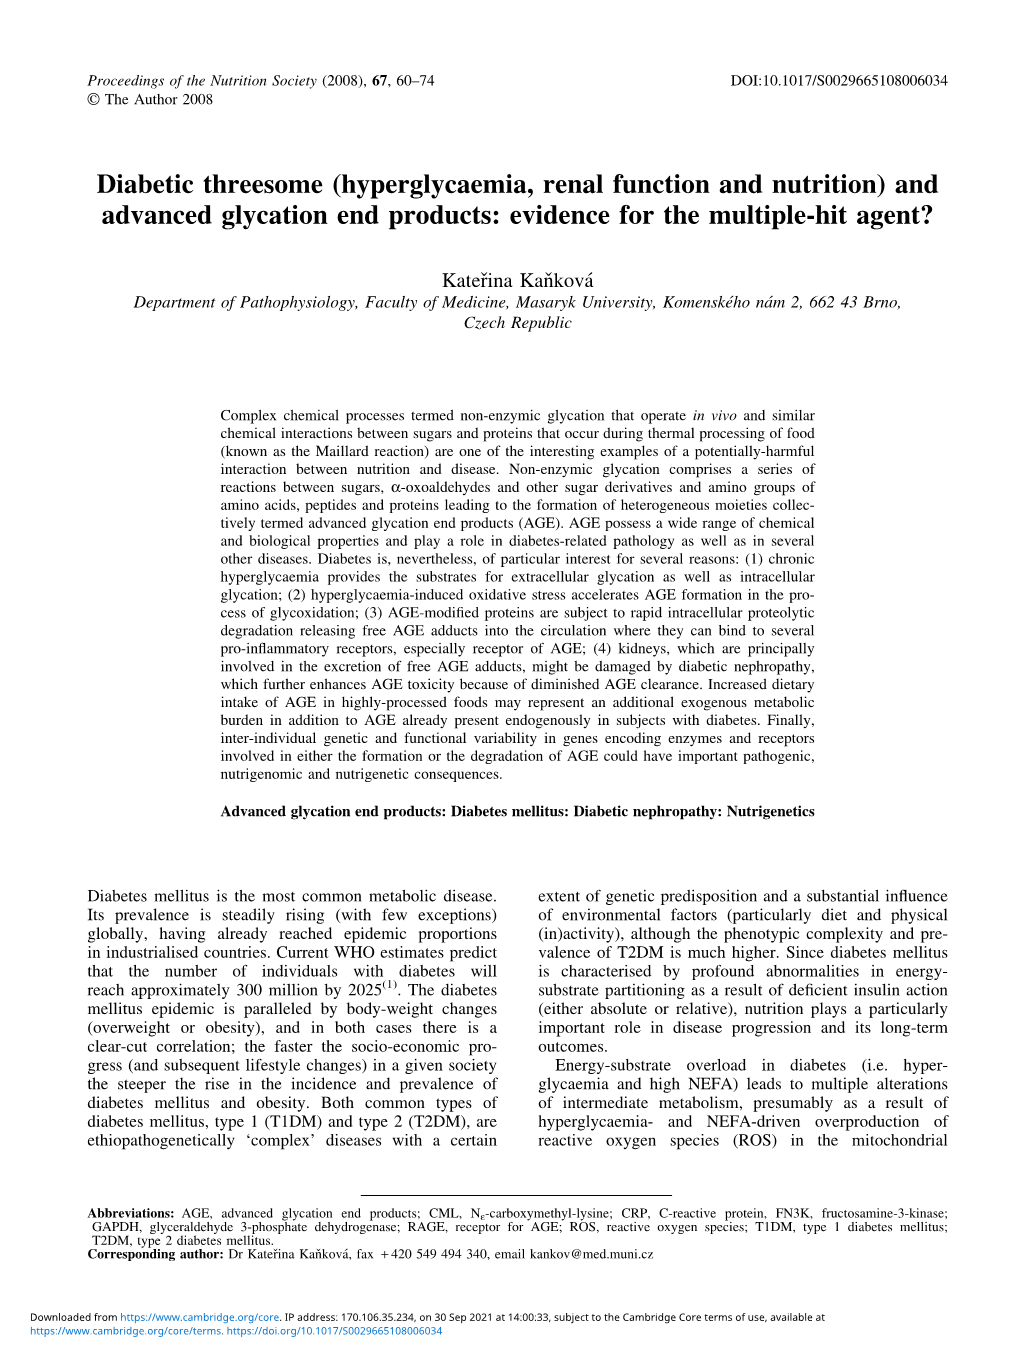 And Advanced Glycation End Products: Evidence for the Multiple-Hit Agent?